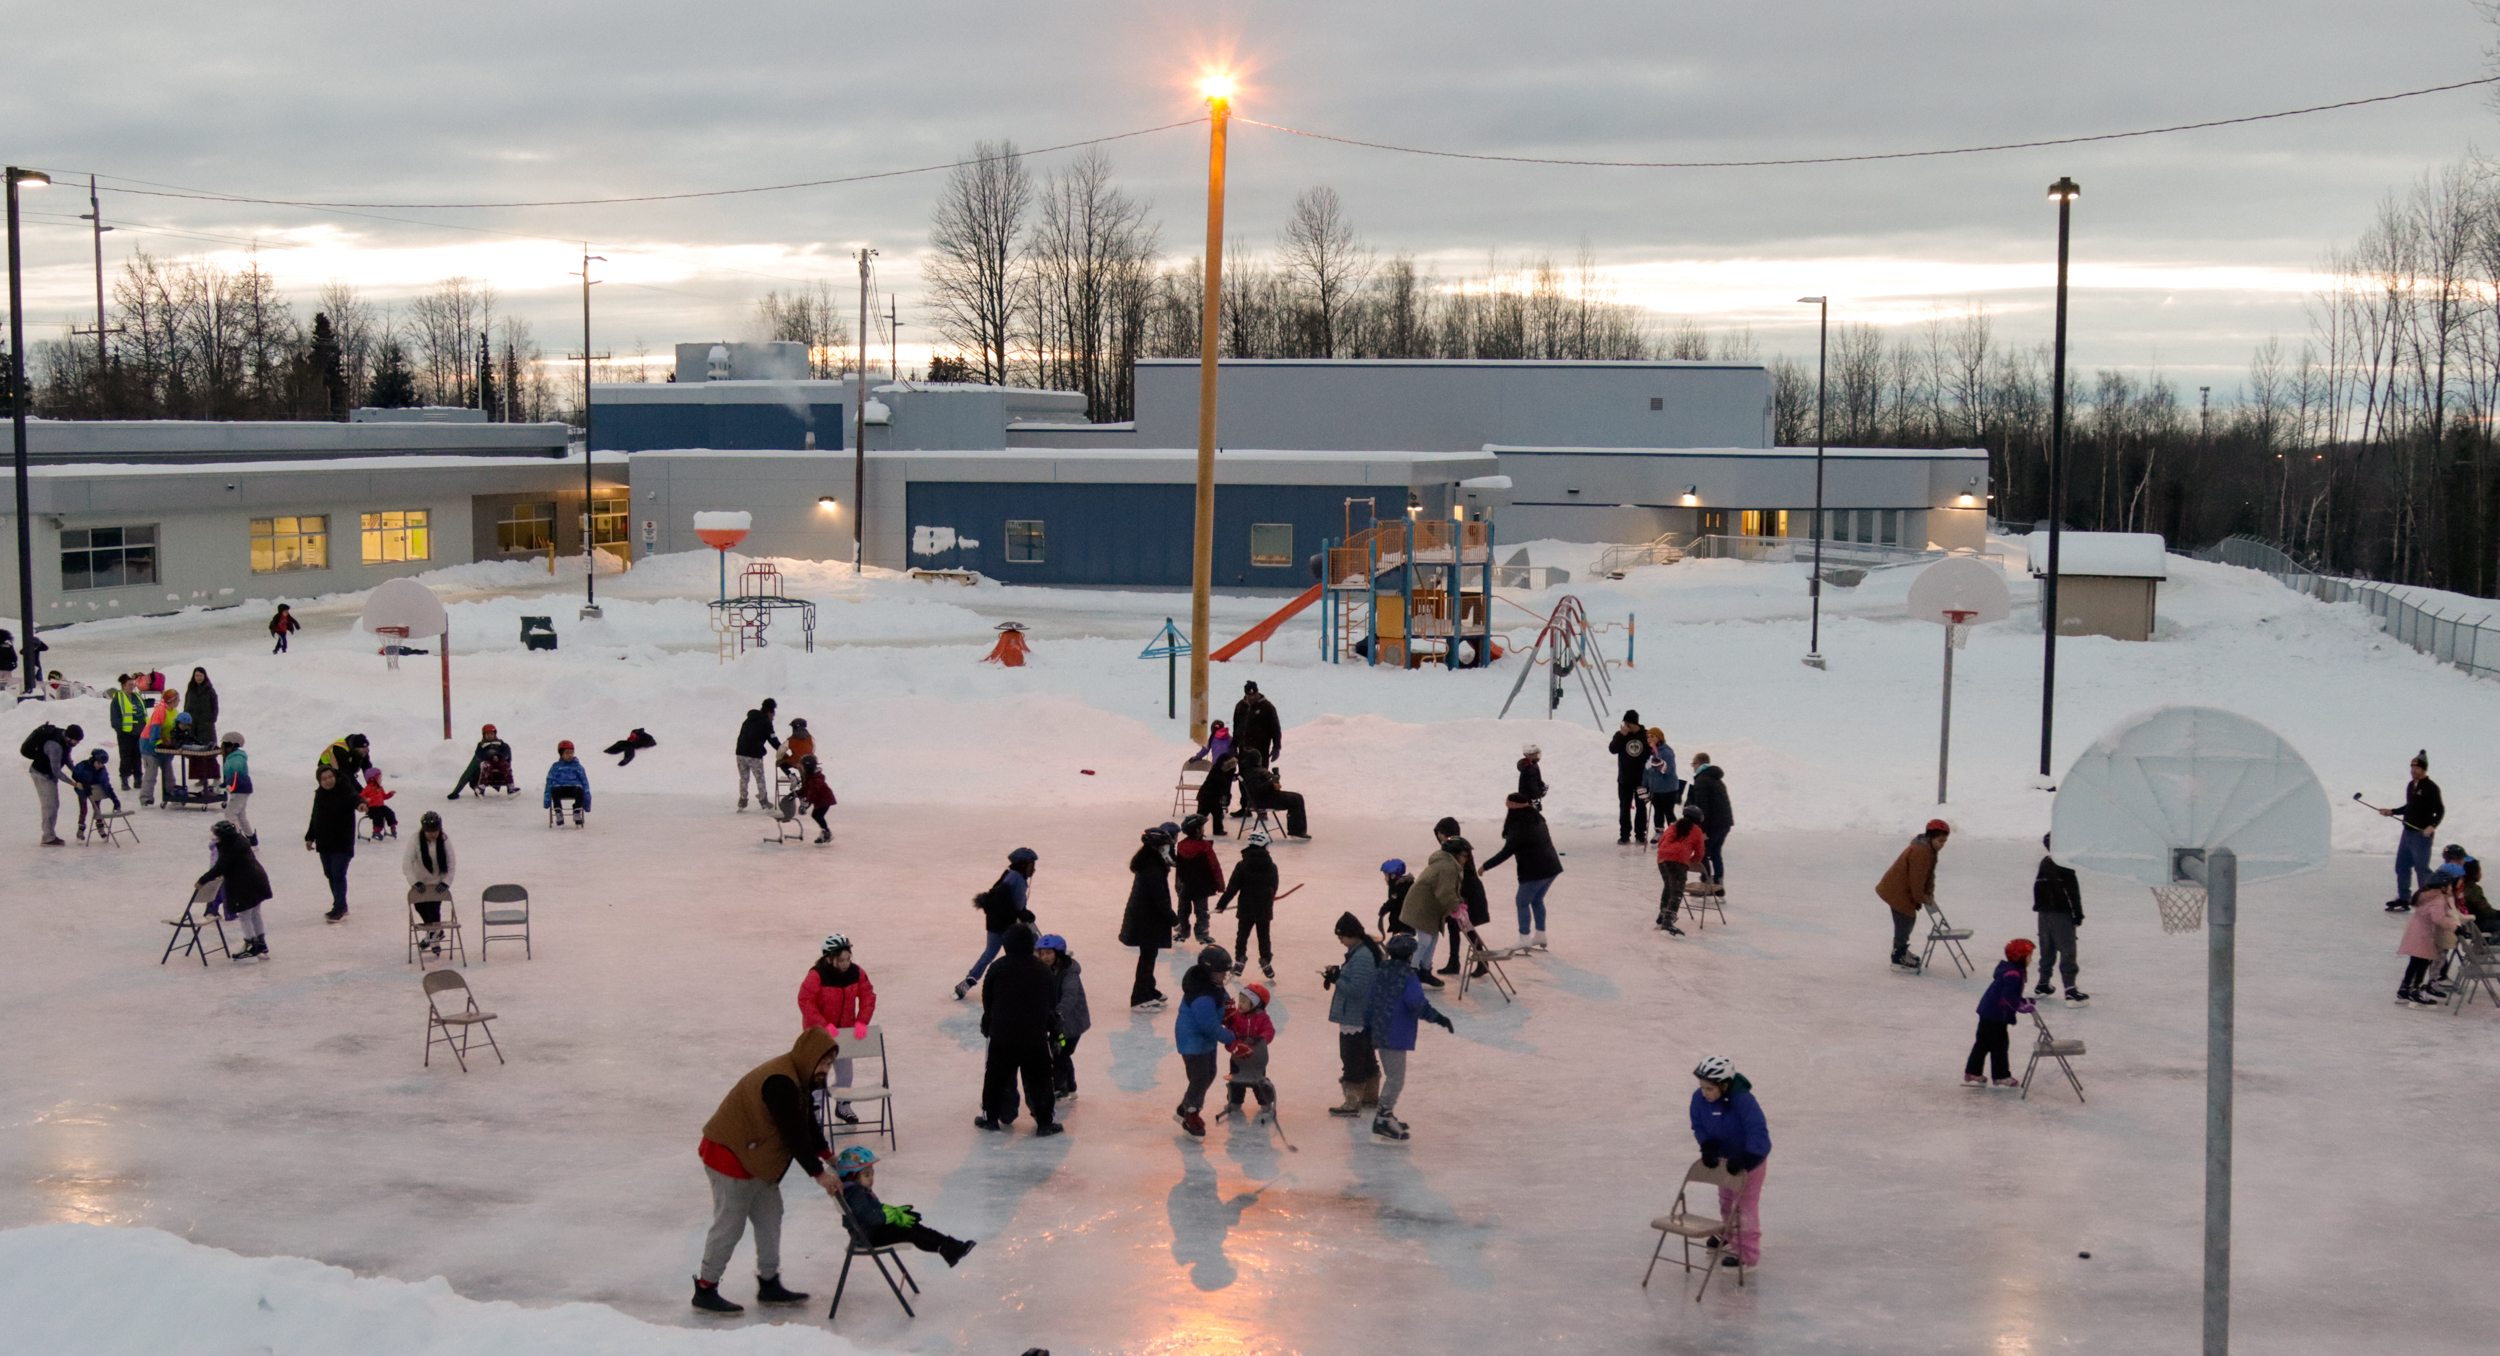 A crowd skates on an ice rink on a school basketball court.